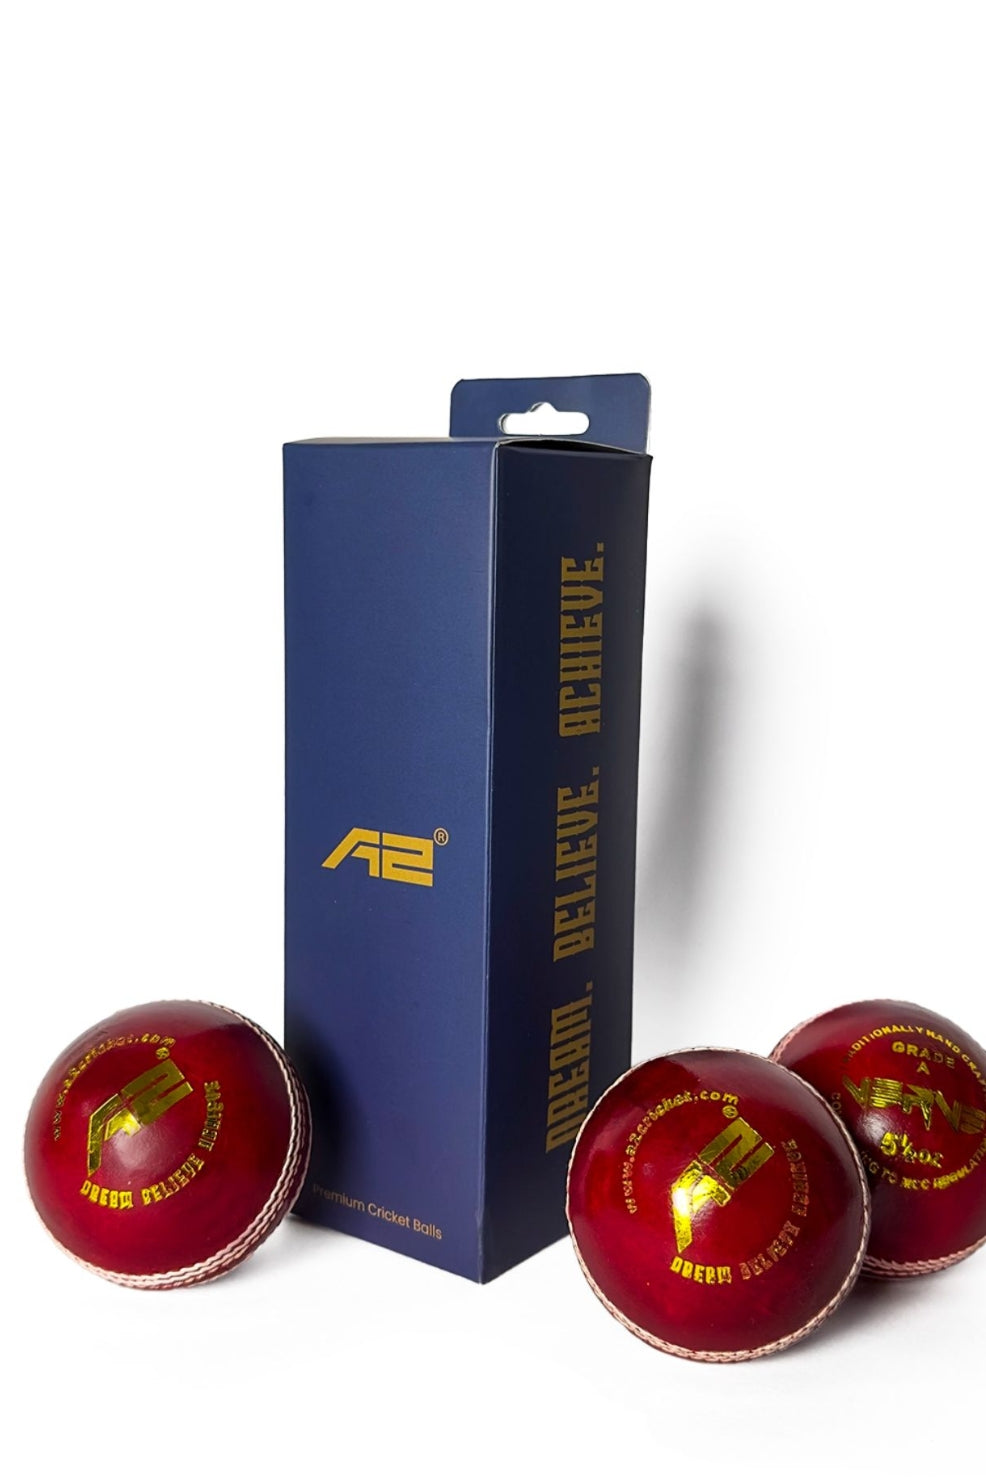 4 Piece Leather Cricket Ball - Verve Red (Box of 3 balls)